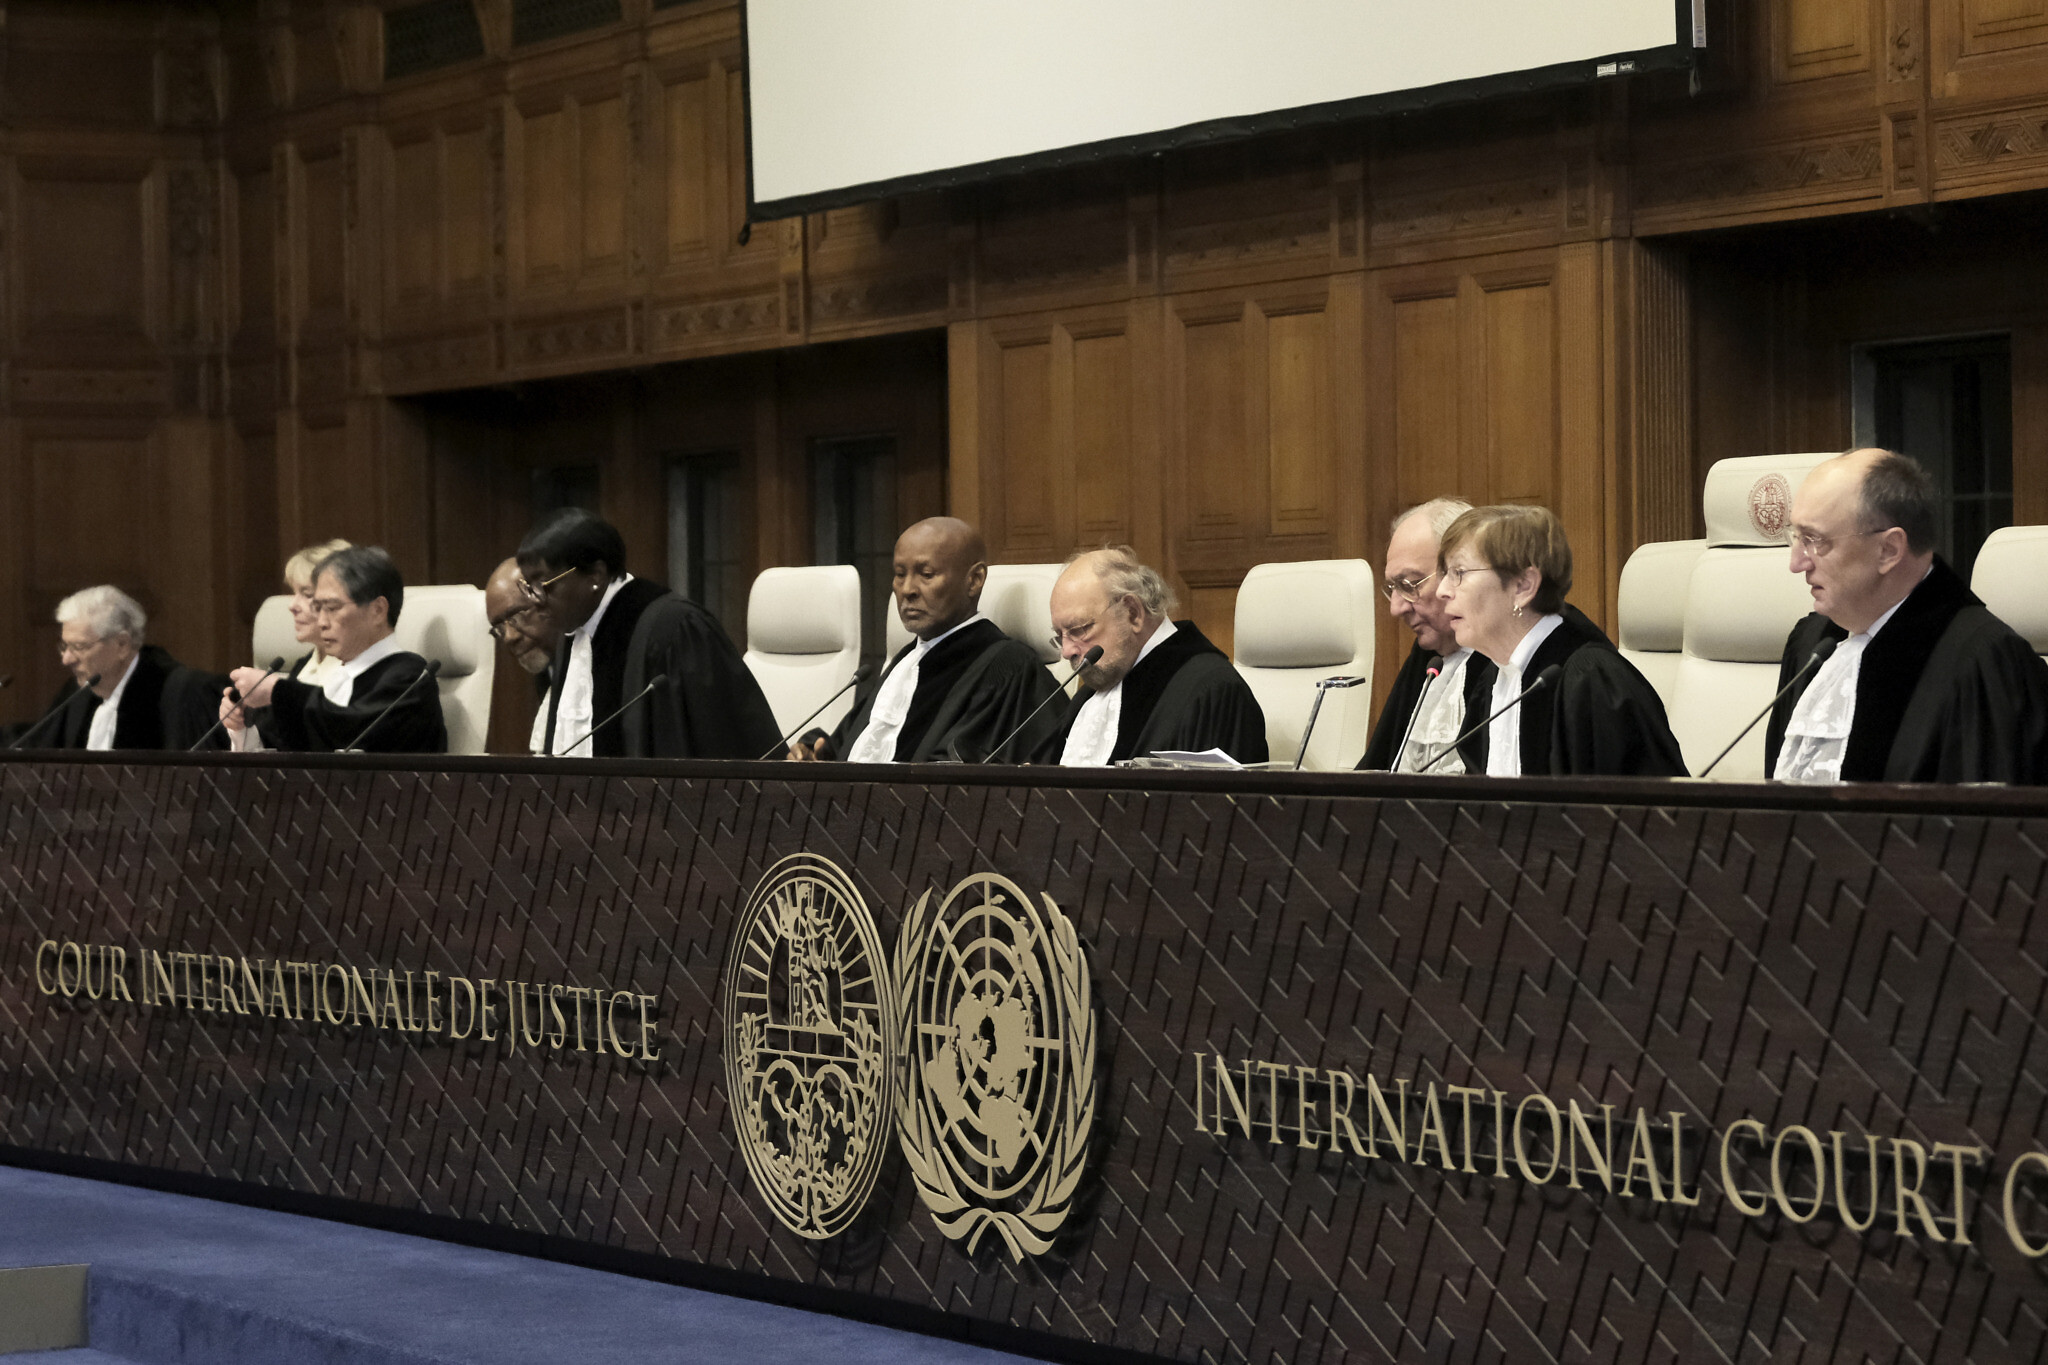 Tensions rise as both nations engage in legal battle at ICJ (Credits: The Times of Israel)